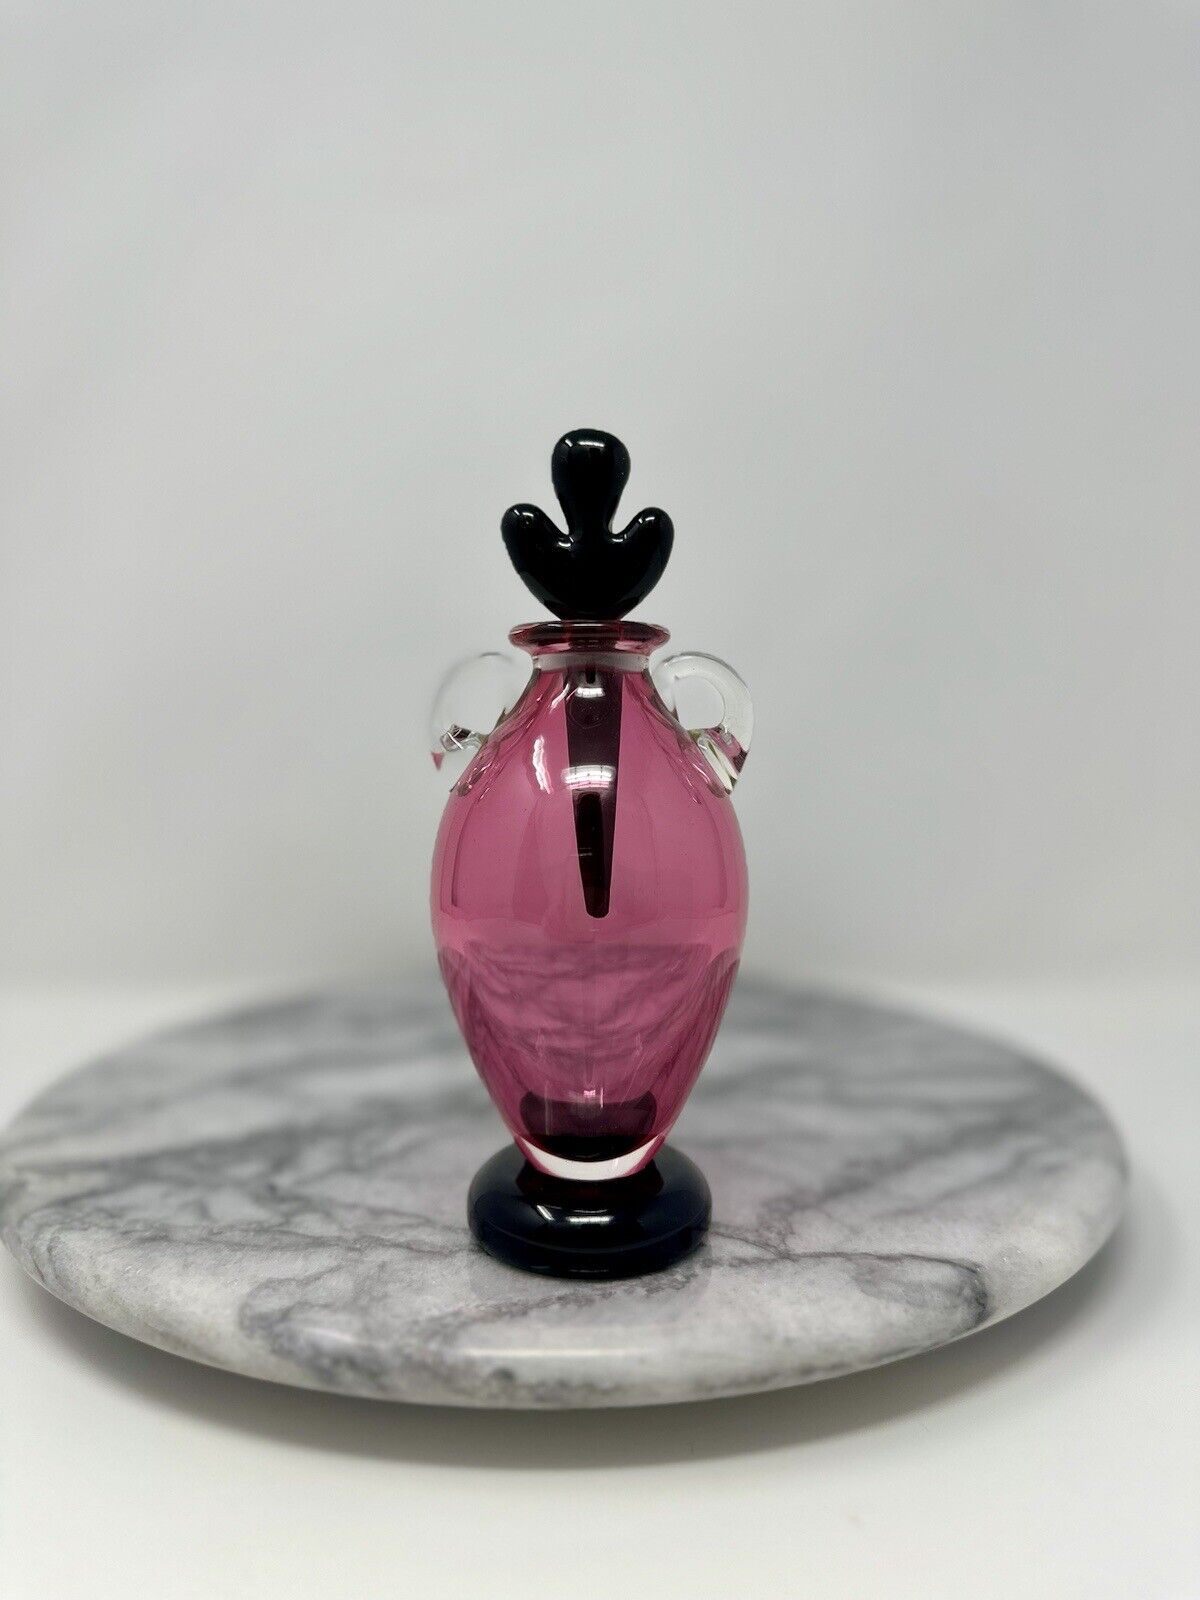 Pink Art Glass Perfume Bottle By Corriea, Signed And Numbered